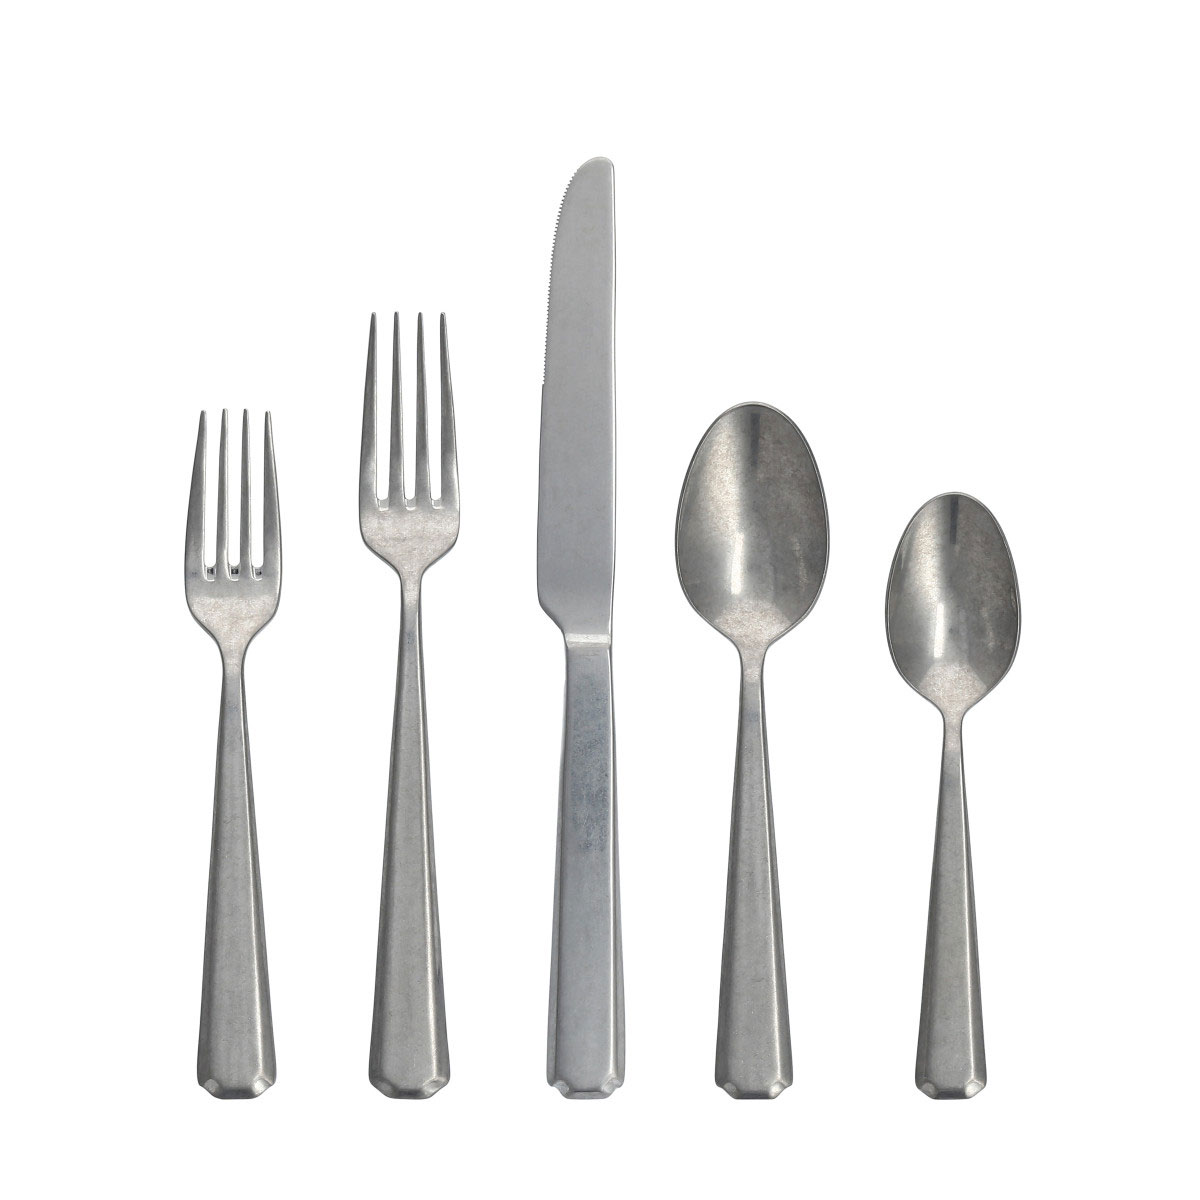 Fortessa Stainless Flatware Valen Tumbled 5 Piece Place Setting